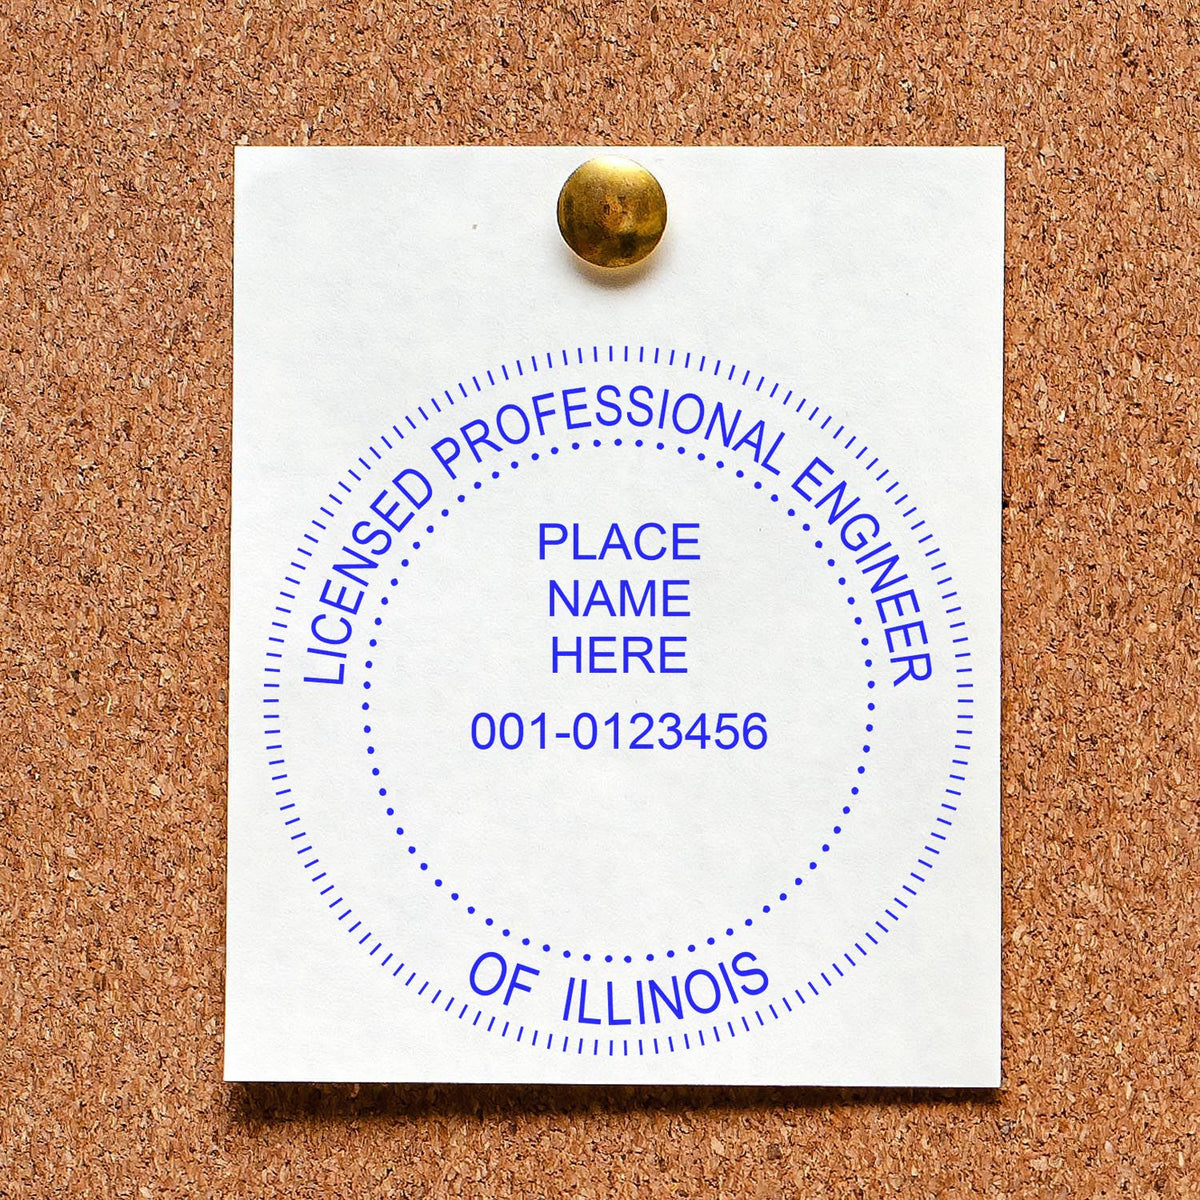 The Self-Inking Illinois PE Stamp stamp impression comes to life with a crisp, detailed photo on paper - showcasing true professional quality.